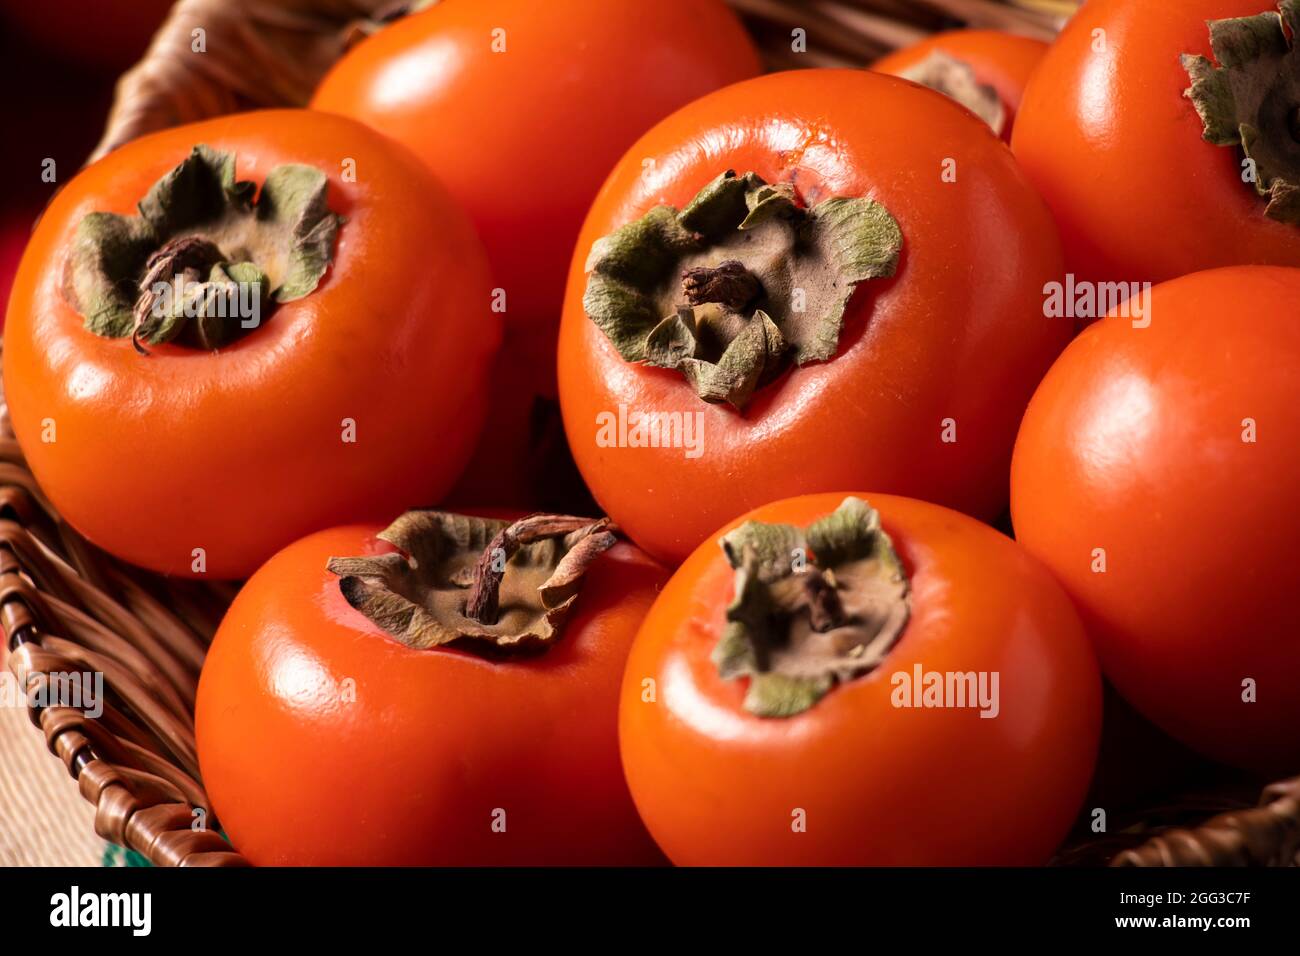 Persimmon from autumn fruits for a charming autumn evening Stock Photo